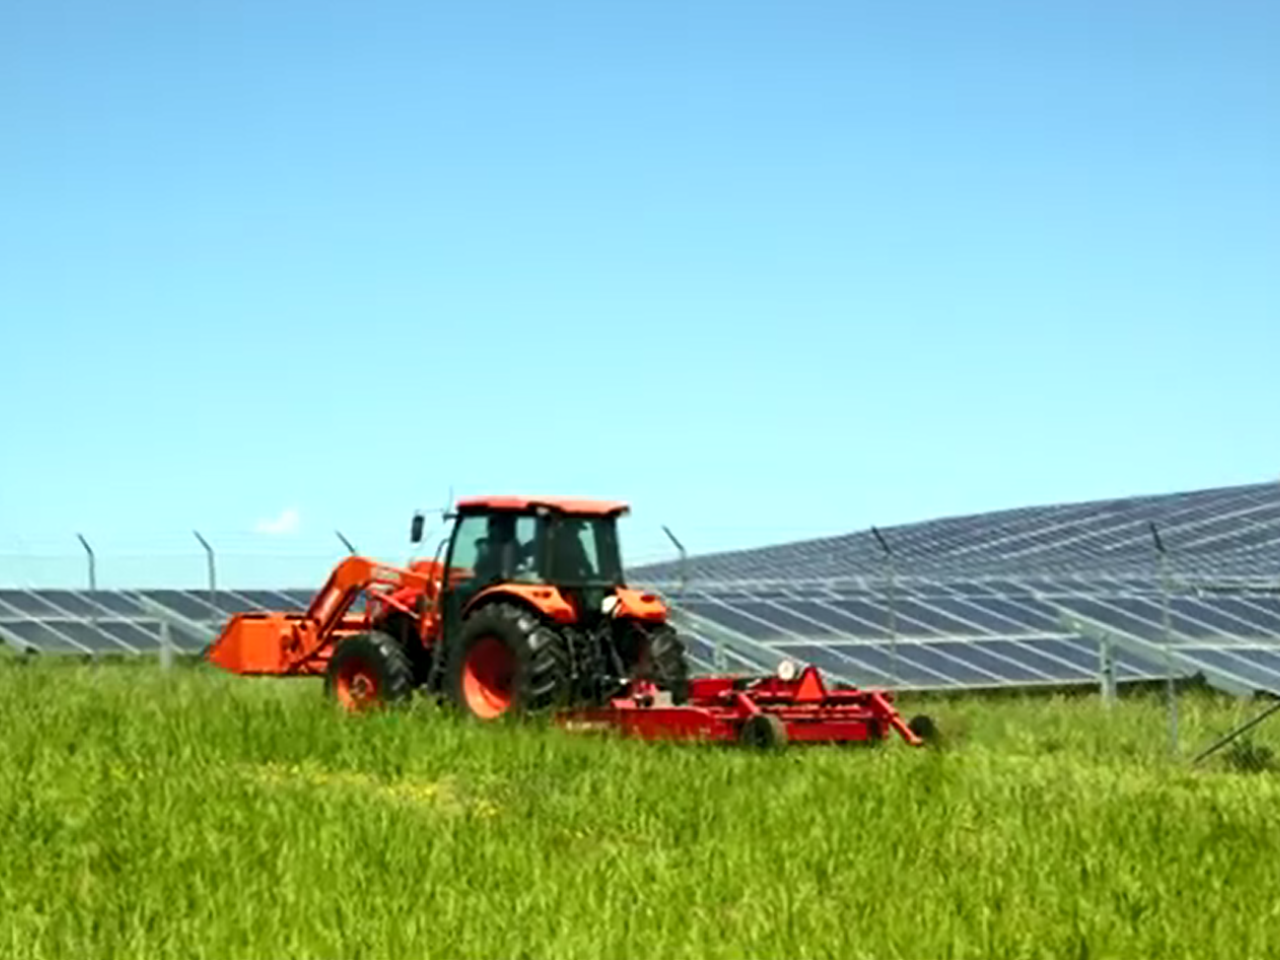 Large red tractor mowing a field next to a solar farm.